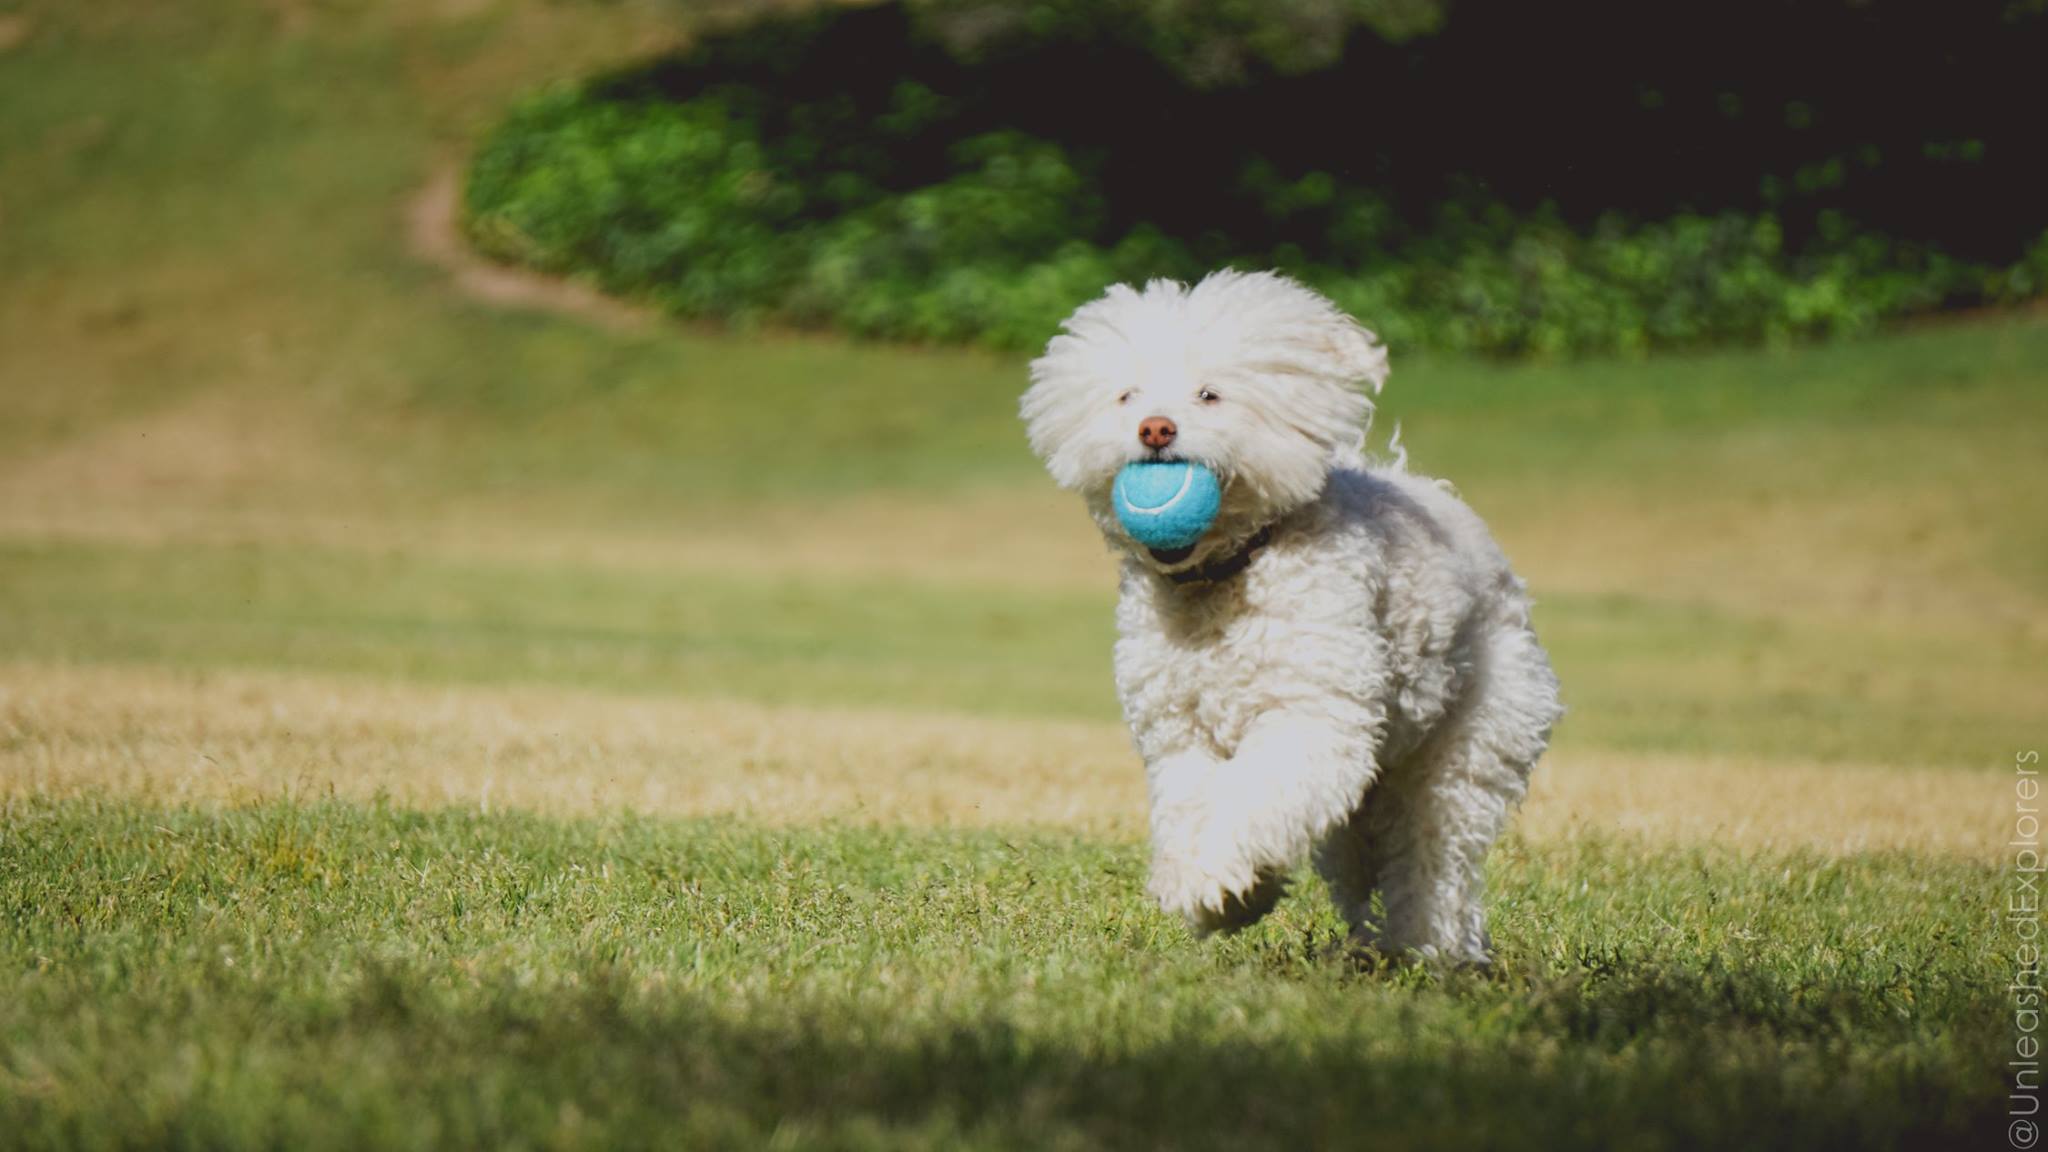 Training your dog to fetch